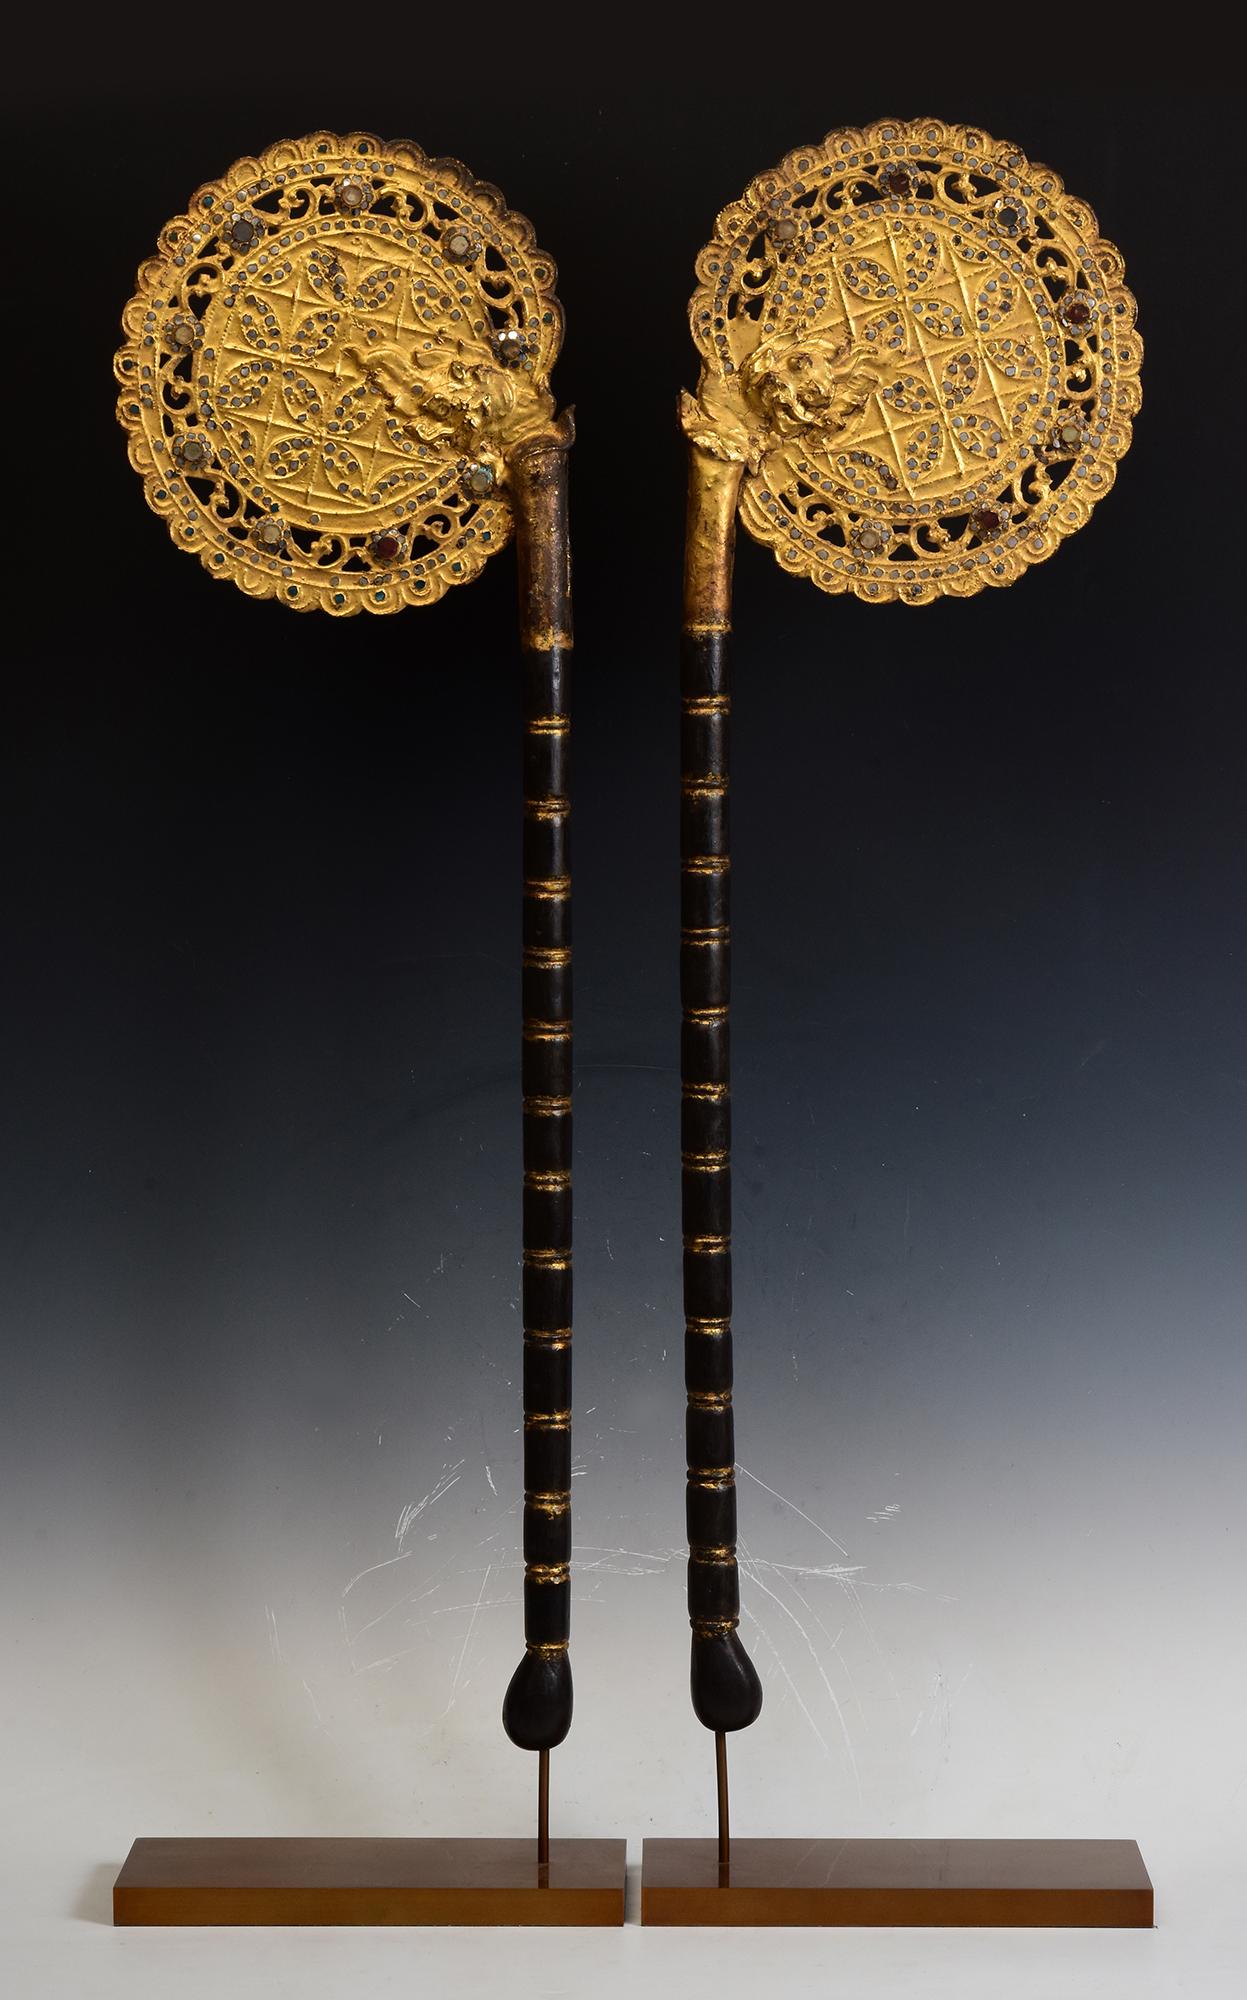 A pair of antique Burmese wooden fans with gilded gold and glass.

Age: Burma, Mandalay Period, 19th Century
Size of fans only: Height 88.5 - 89.5 C.M. / Width 25.3 C.M.
Height including stand: 98 - 98.5 C.M.
Condition: Nice condition overall (some